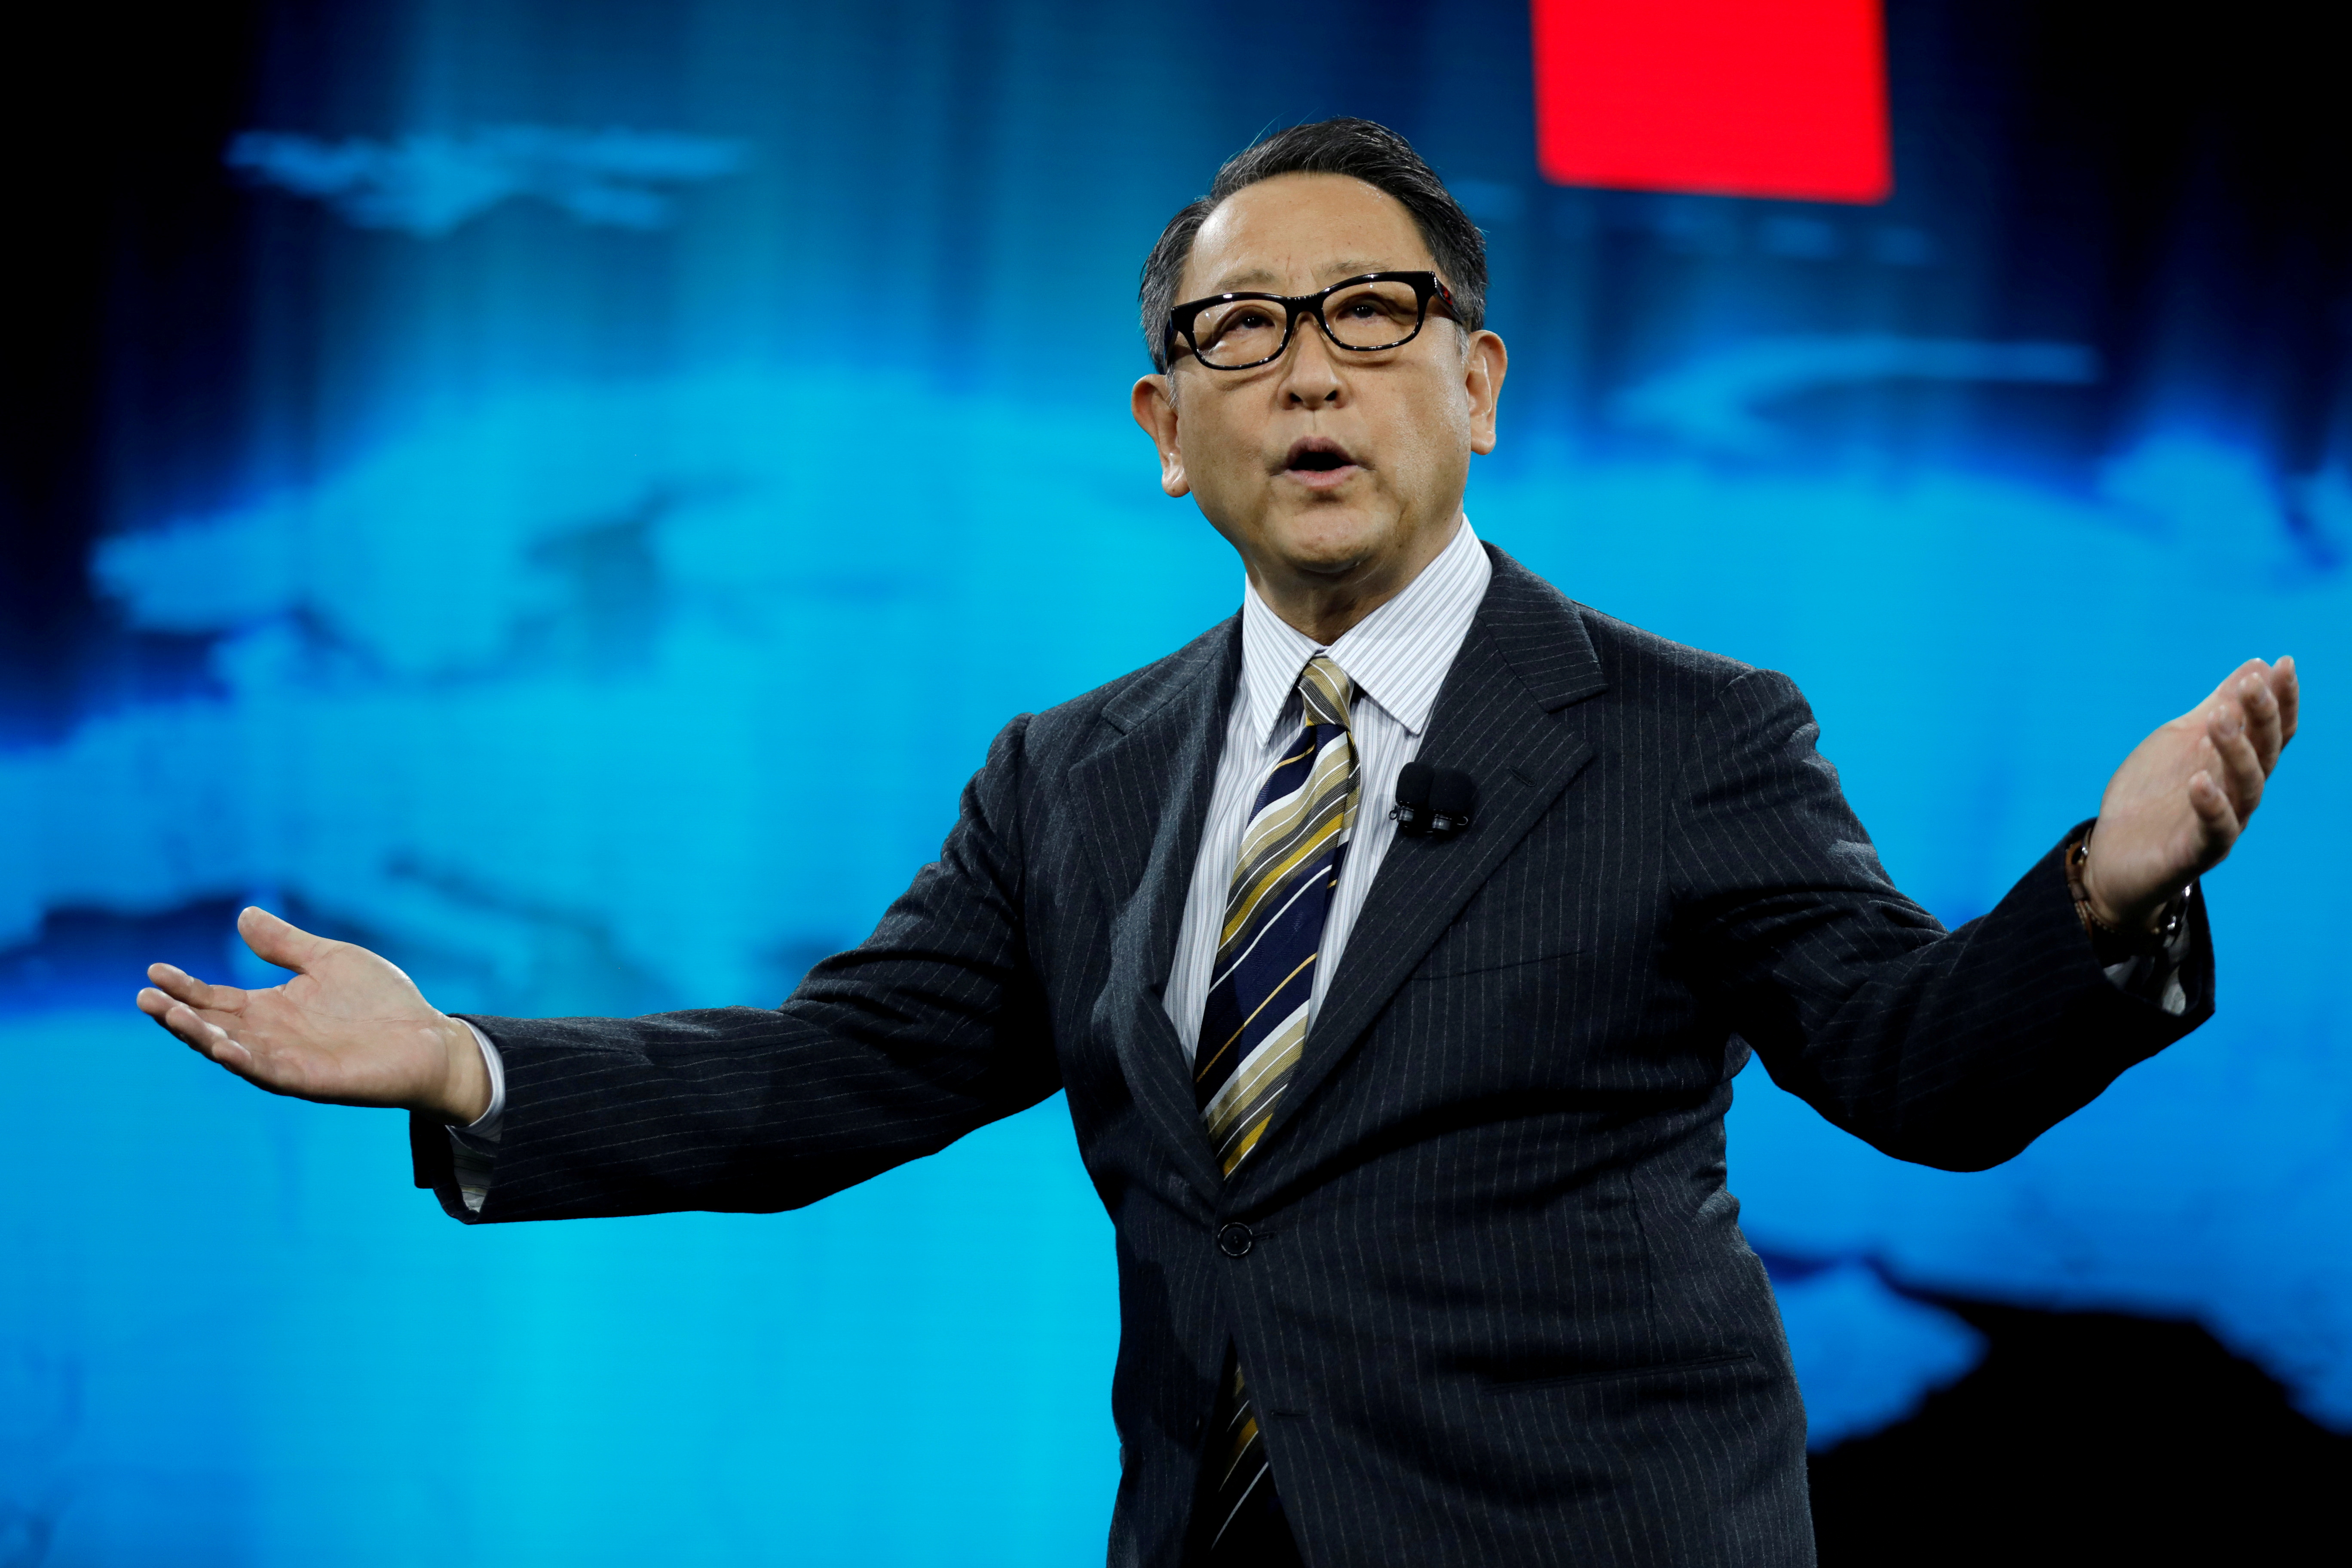 Akio Toyoda, president of Toyota Motor Corporation, speaks at a news conference, where he announced Toyota's plans to build a prototype city of the future on a 175-acre site at the base of Mt. Fuji in Japan, during the 2020 CES in Las Vegas